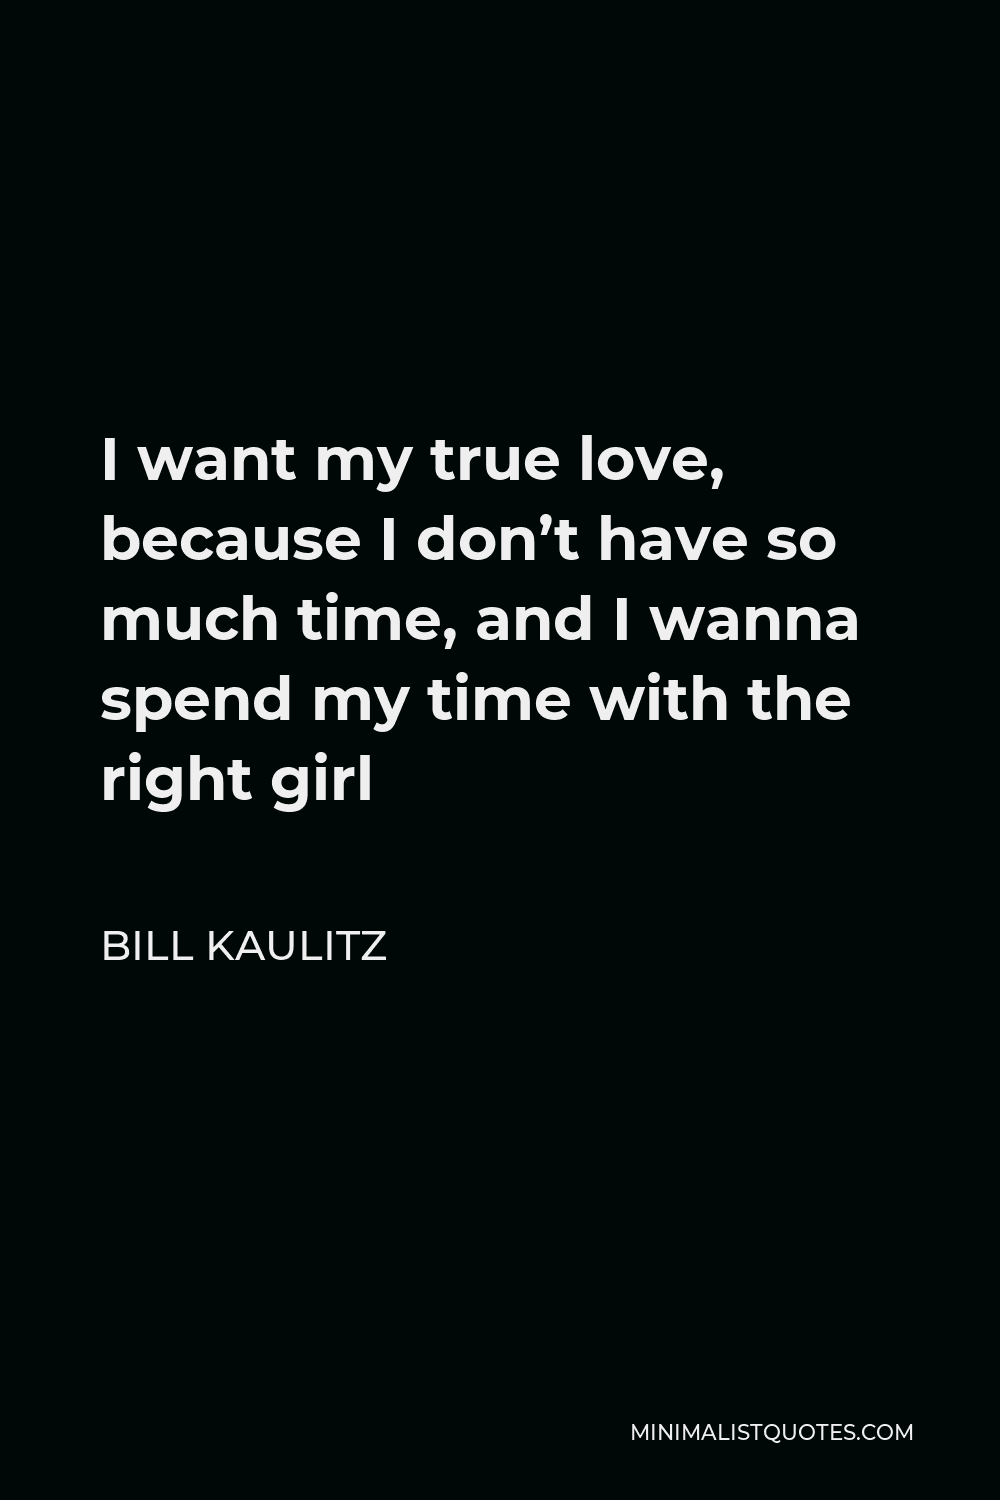 Bill Kaulitz Quote - I want my true love, because I don’t have so much time, and I wanna spend my time with the right girl